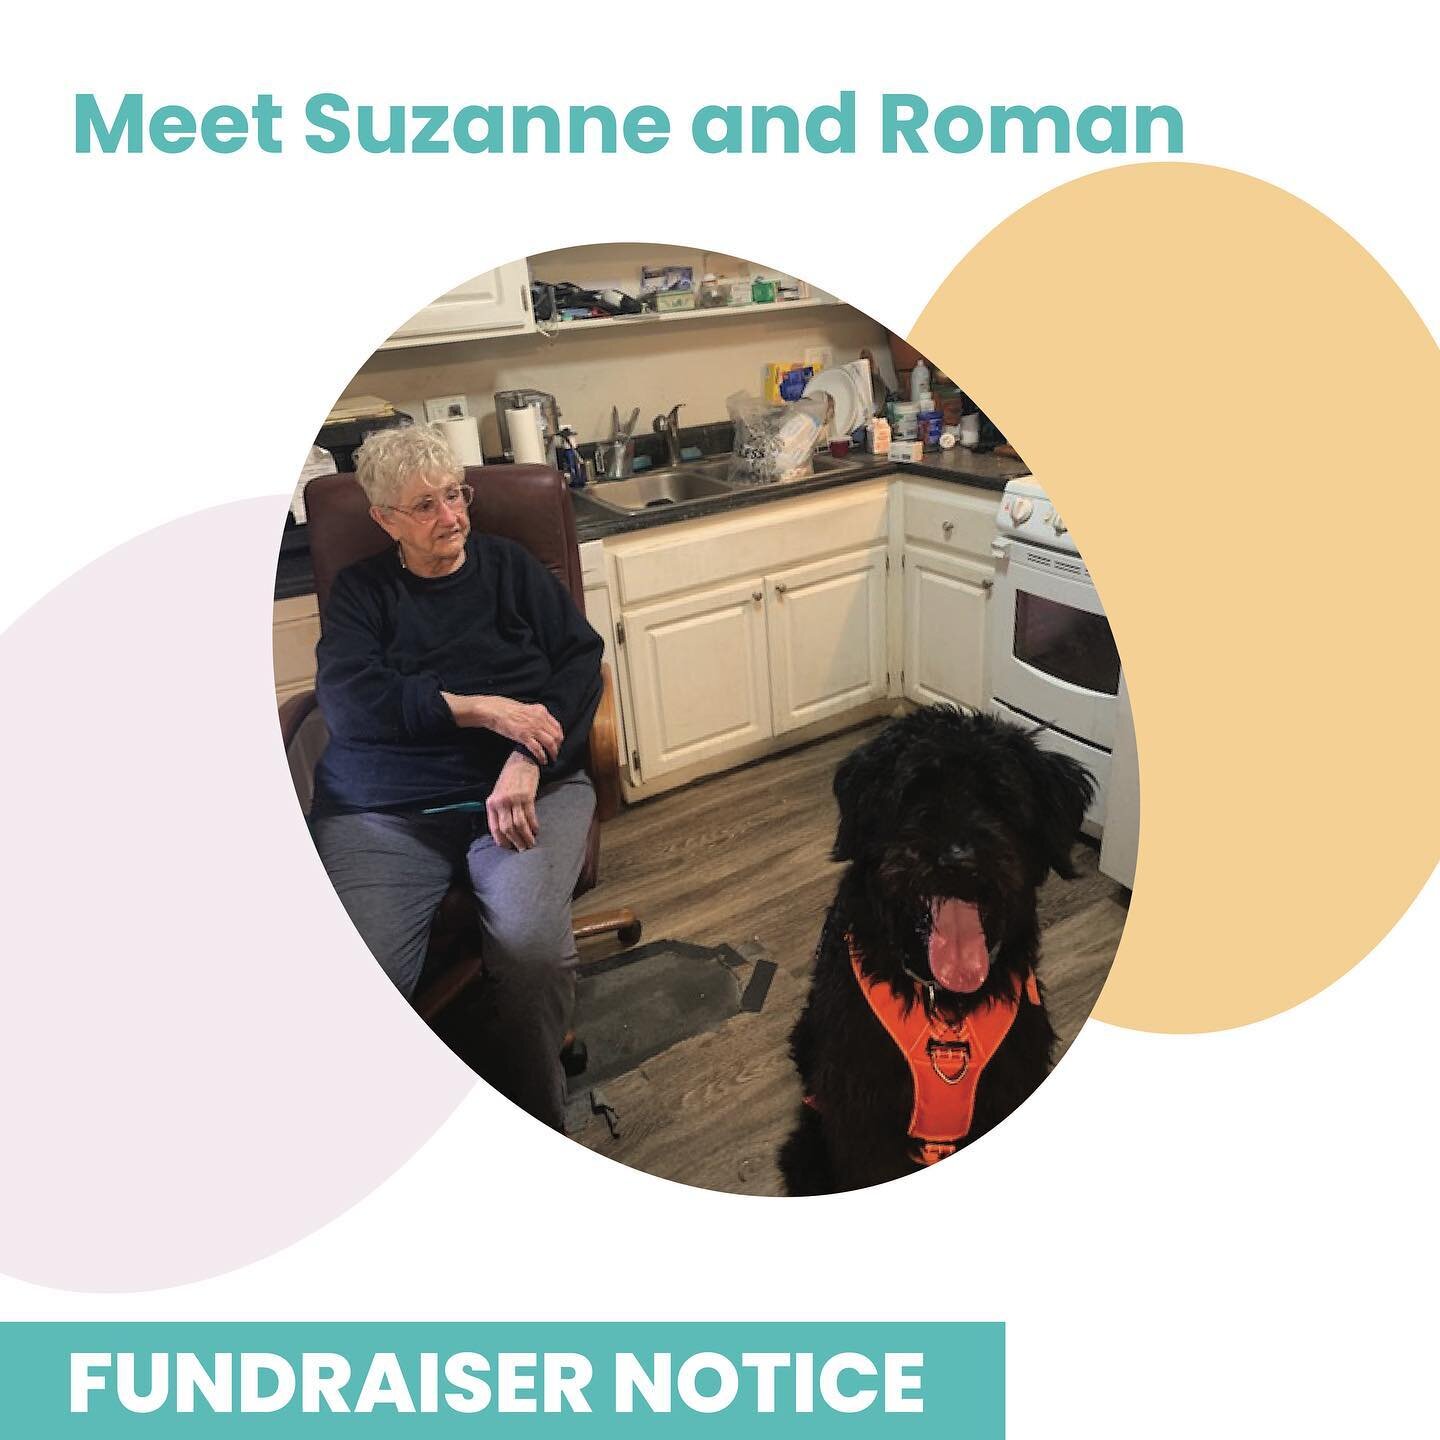 Fundraiser Notice: Help Support Suzanne and her baby Roman 💛

Meet Miss Suzanne (84 y/o) and Roman, a 5 y/o schnauzer /poodle mix she had adopted from the local humane society when he was about 6 months old. Having lost her only son, with no other f